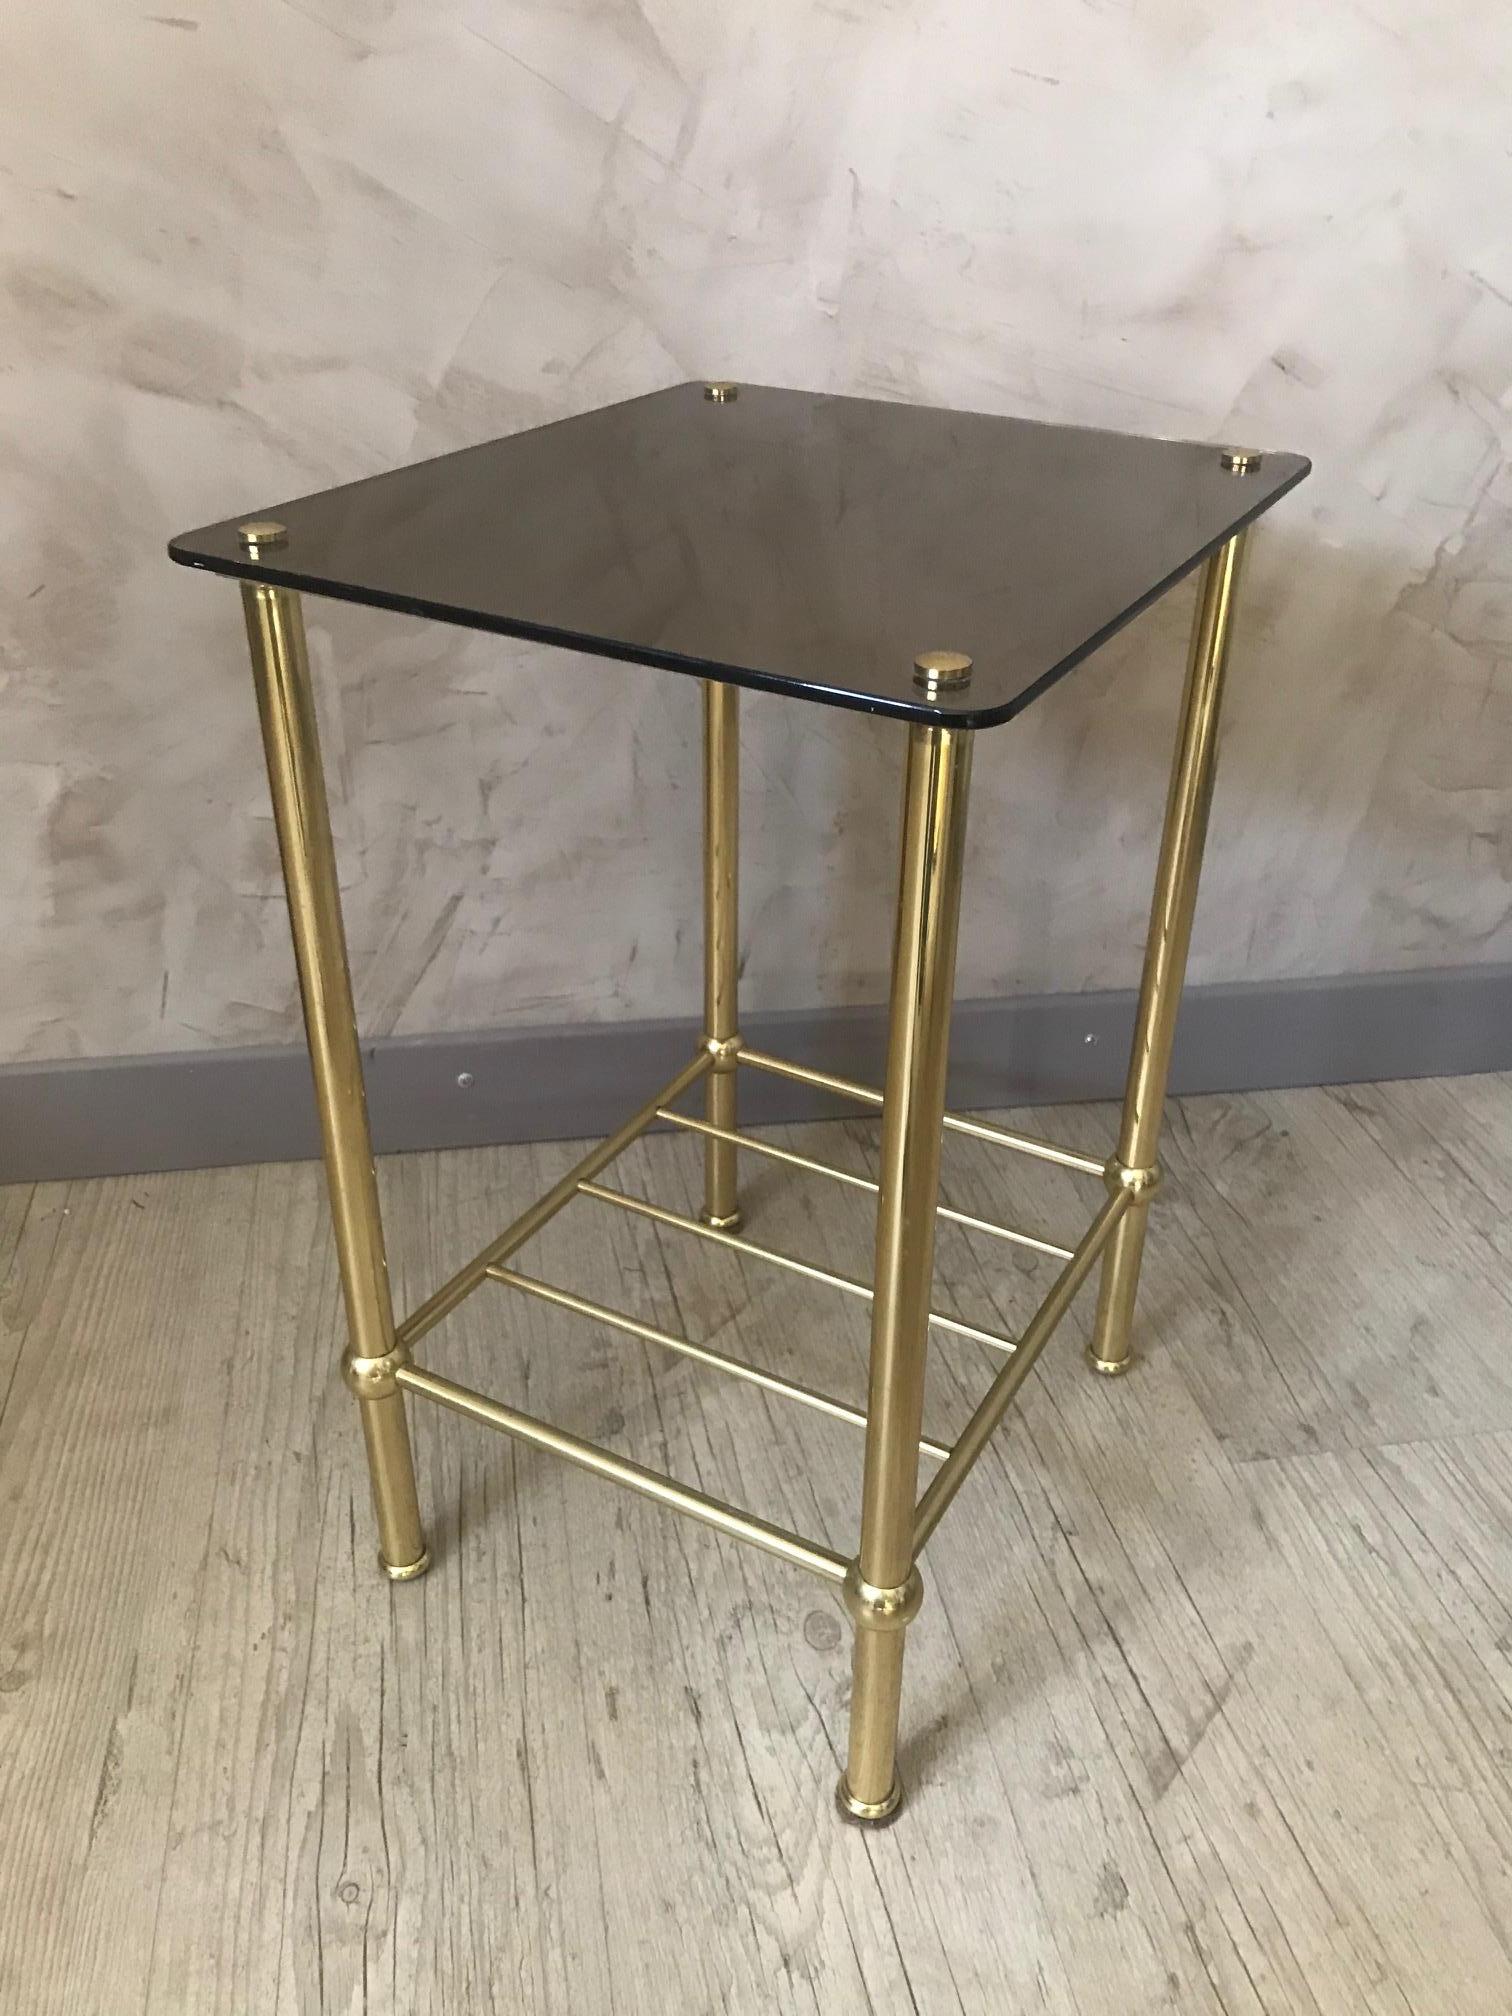 Beautiful 20th century French gilded brass base and mirror top side table from the 1970s. 
Very high quality and very good condition.